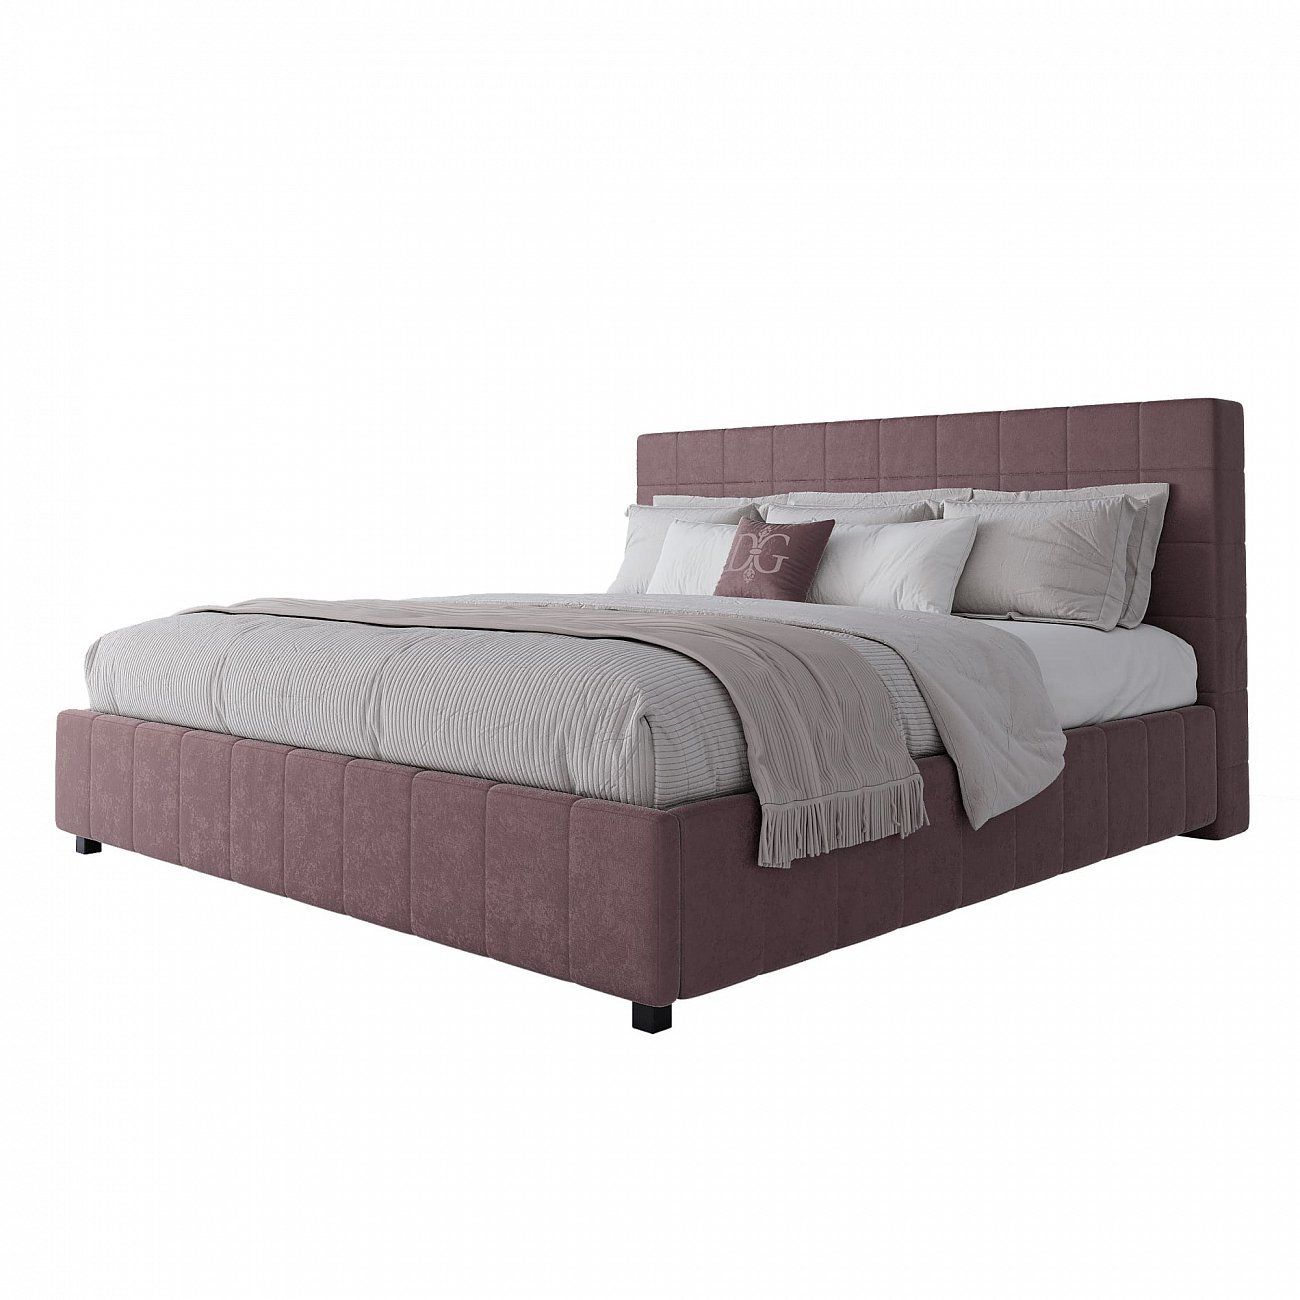 Large Bed 200x200 Shining Modern dusty rose